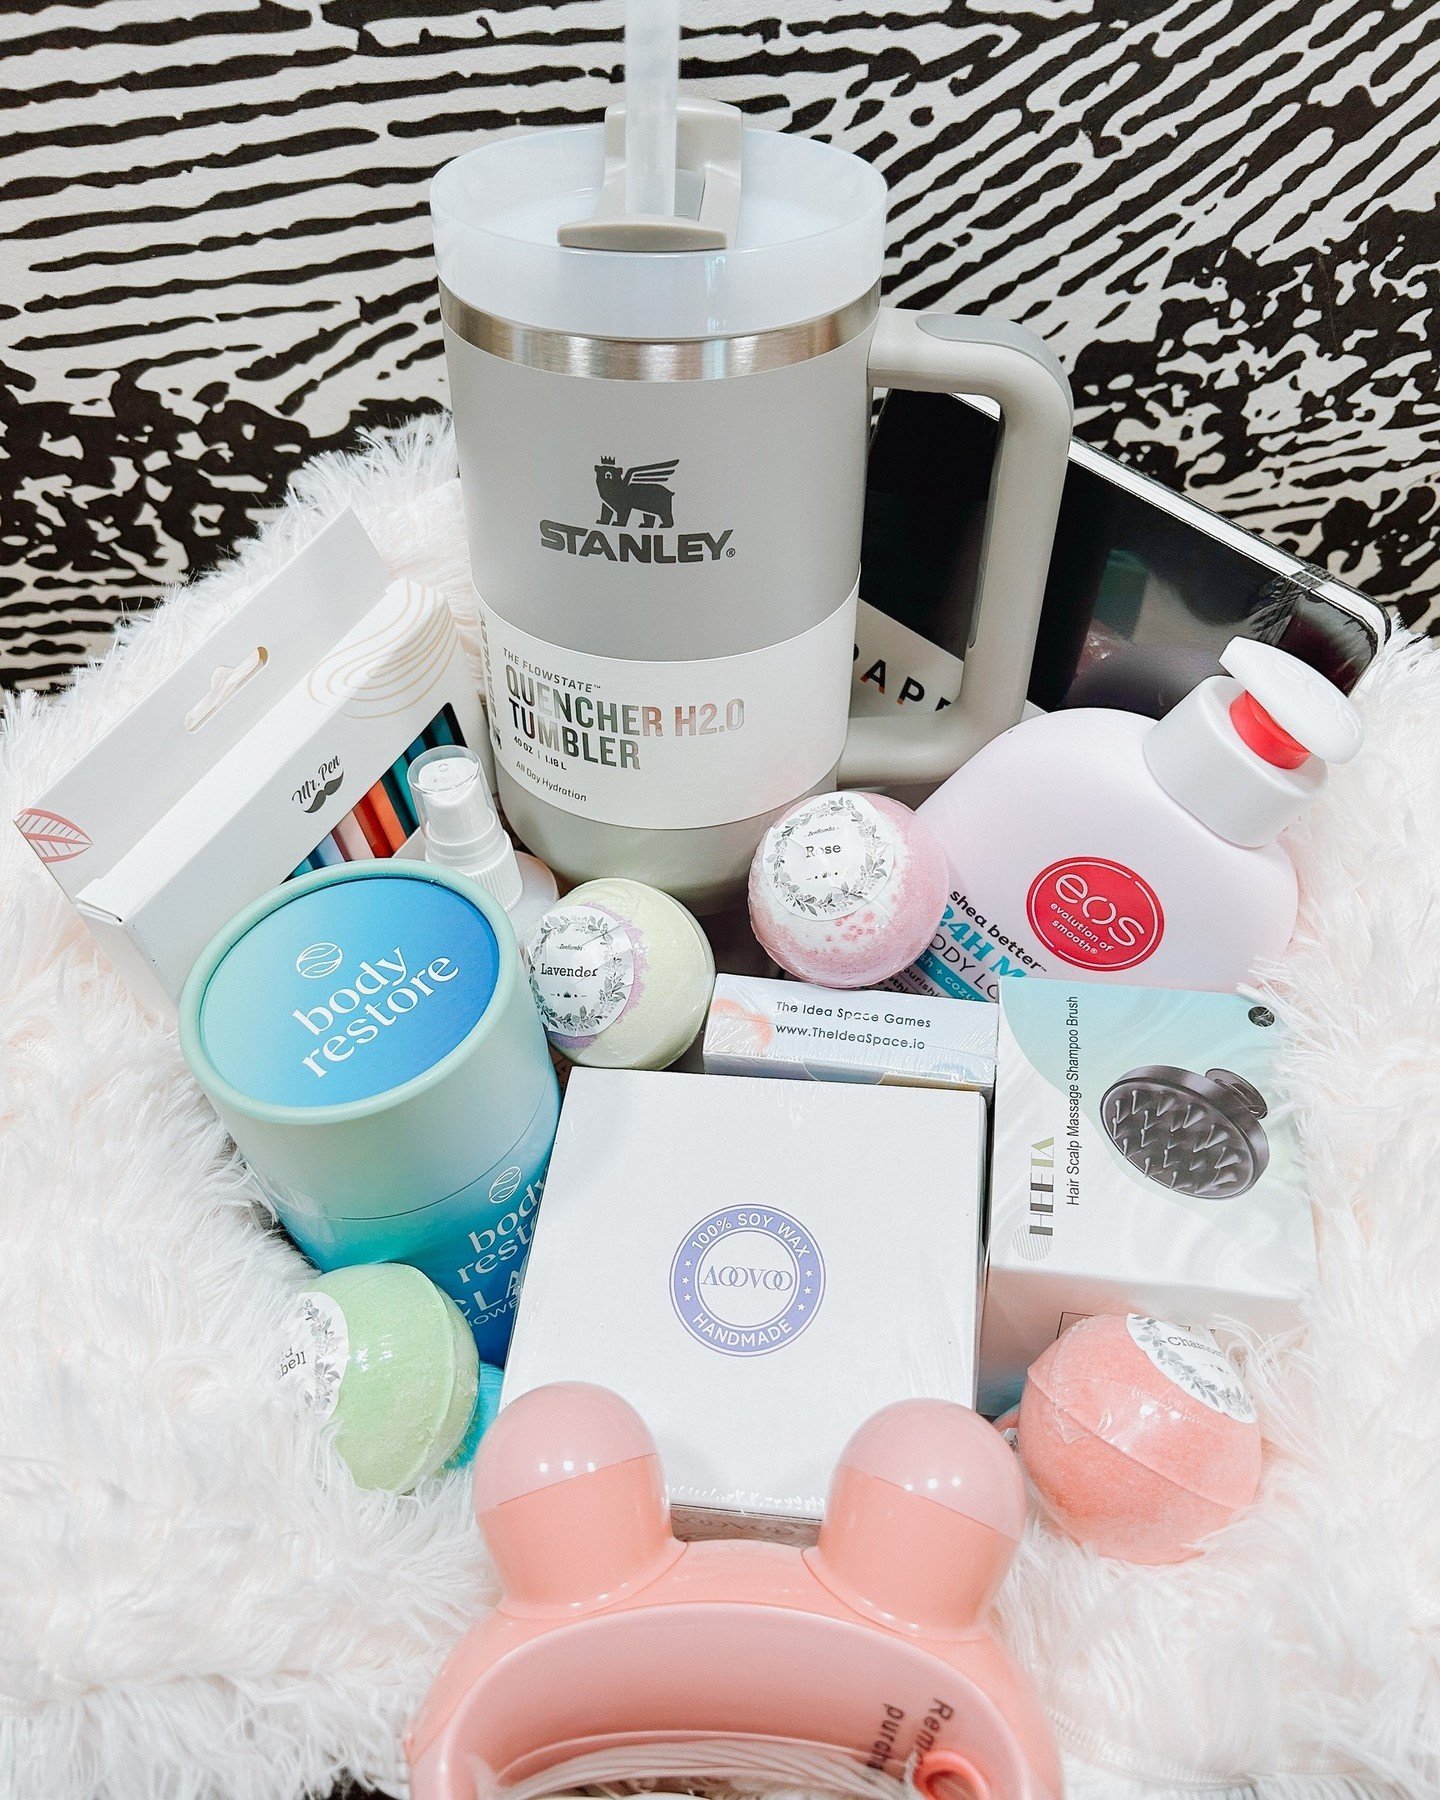 April giveaway! 🌸🌹We are giving away a basket full of self care items that our staff loves!

How to enter:
🤍must be following @universityvillage
🤍like this post
🤍comment your favorite way to relax

*Must be a resident of University Village to wi